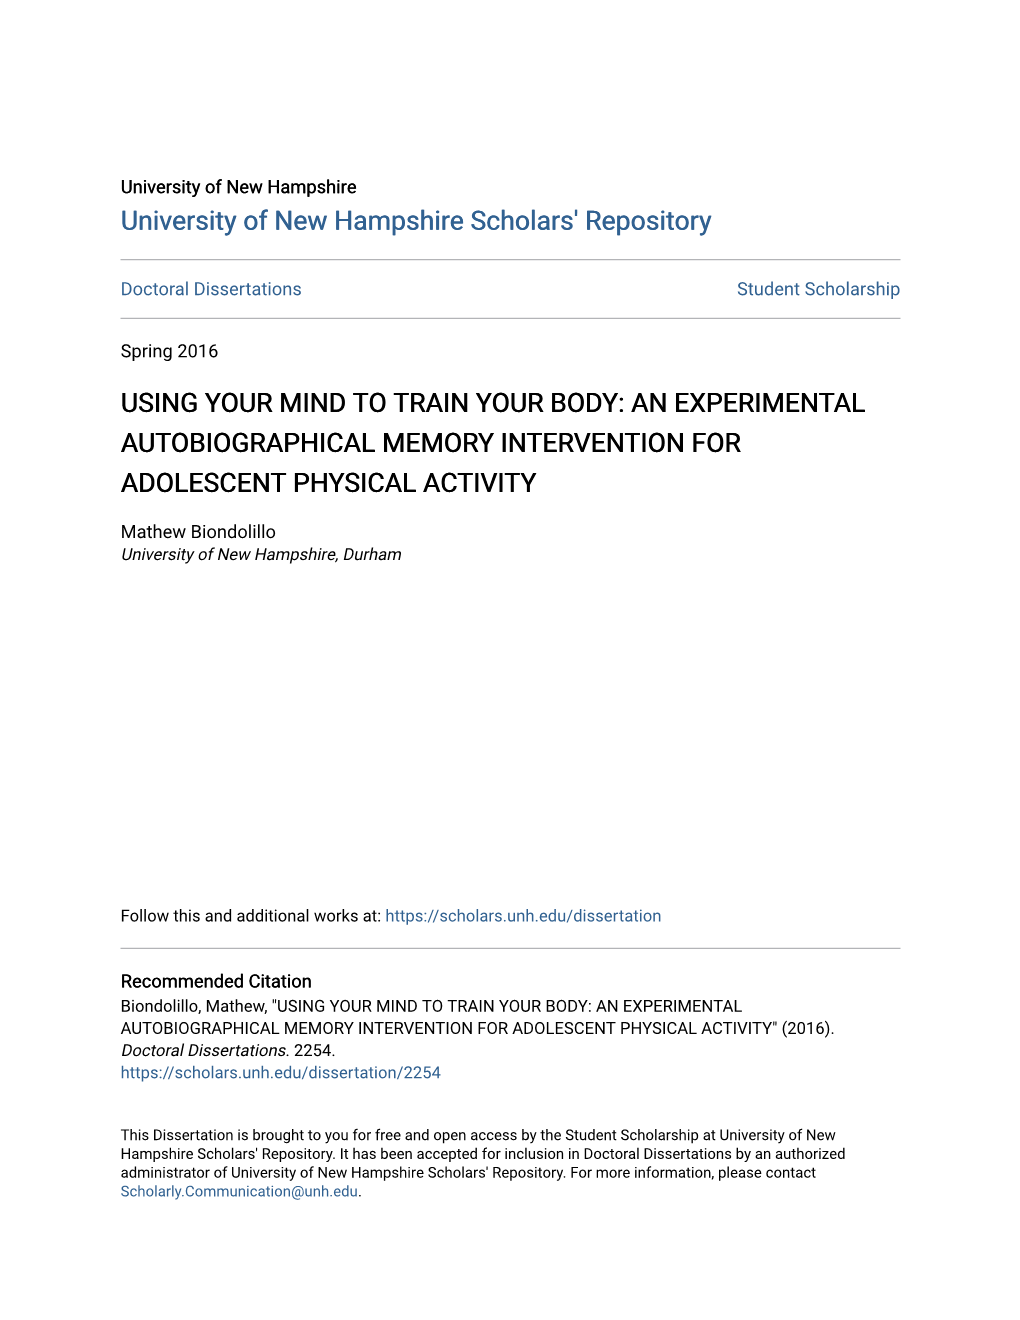 Using Your Mind to Train Your Body: an Experimental Autobiographical Memory Intervention for Adolescent Physical Activity